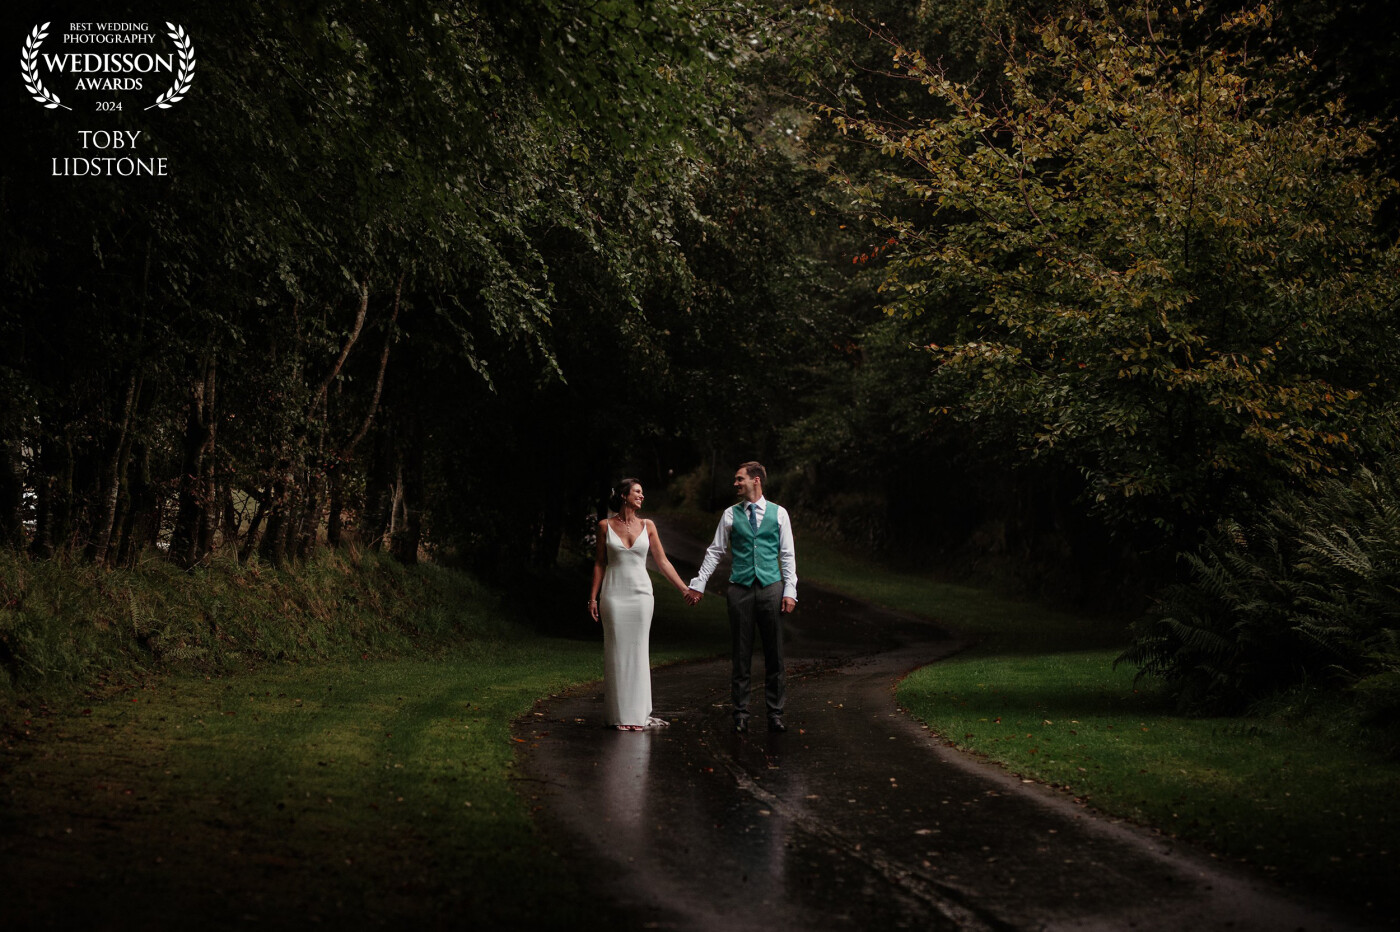 I just love creating scenes with big contrast in light. It rained all day for this wedding, but  these two were stars and embraced the weather for some outdoor shots, I like the fact the road is wet and creating a reflection :)